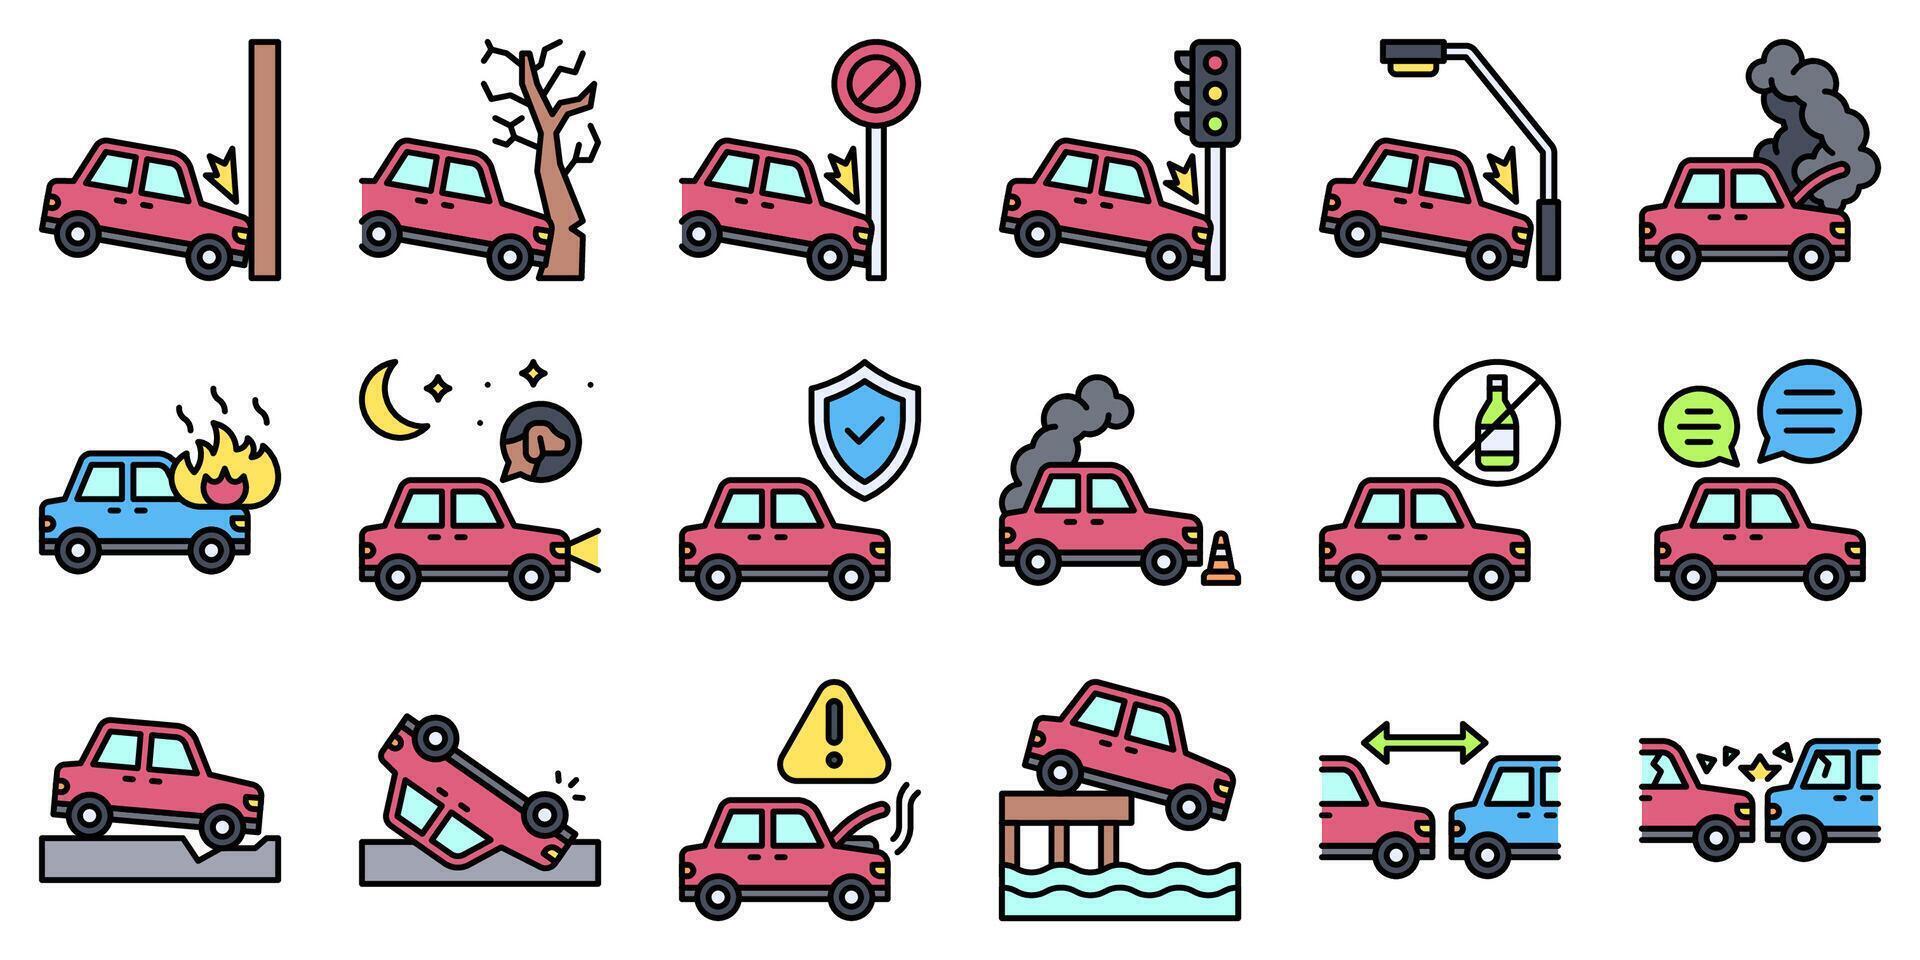 Car accident and safety related filled icon set 1 vector